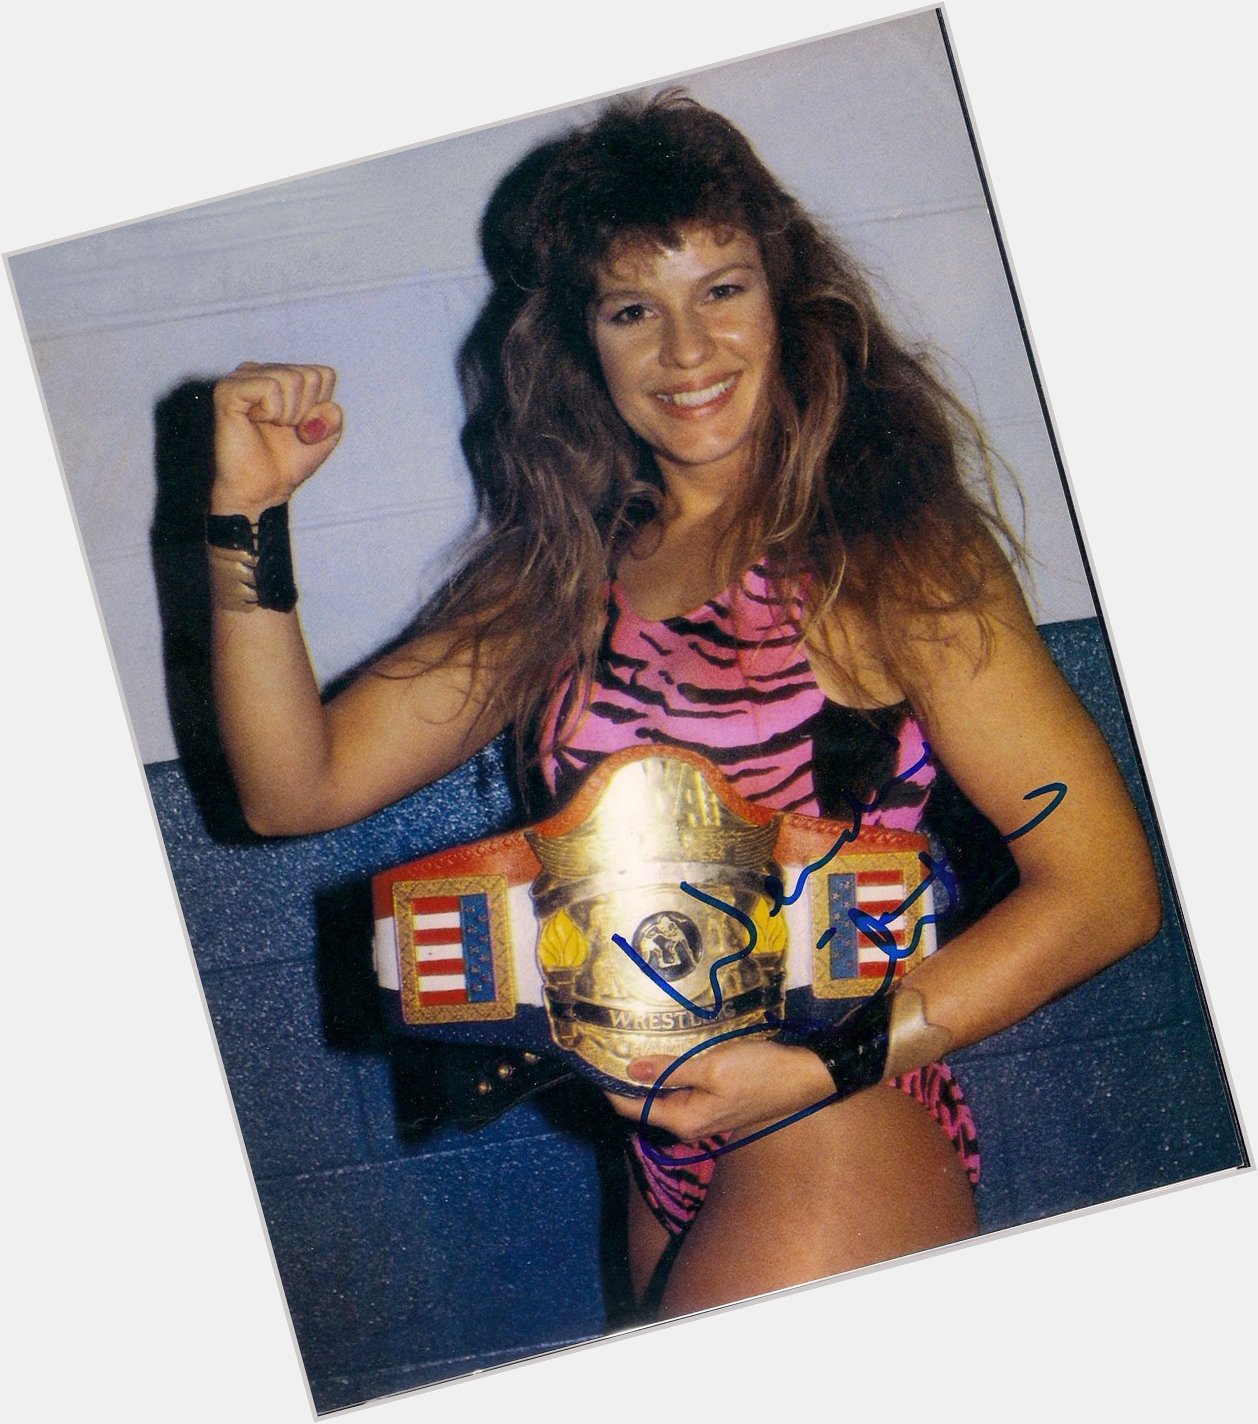 Happy Birthday to former champion and Hall of Famer Wendi Richter! 